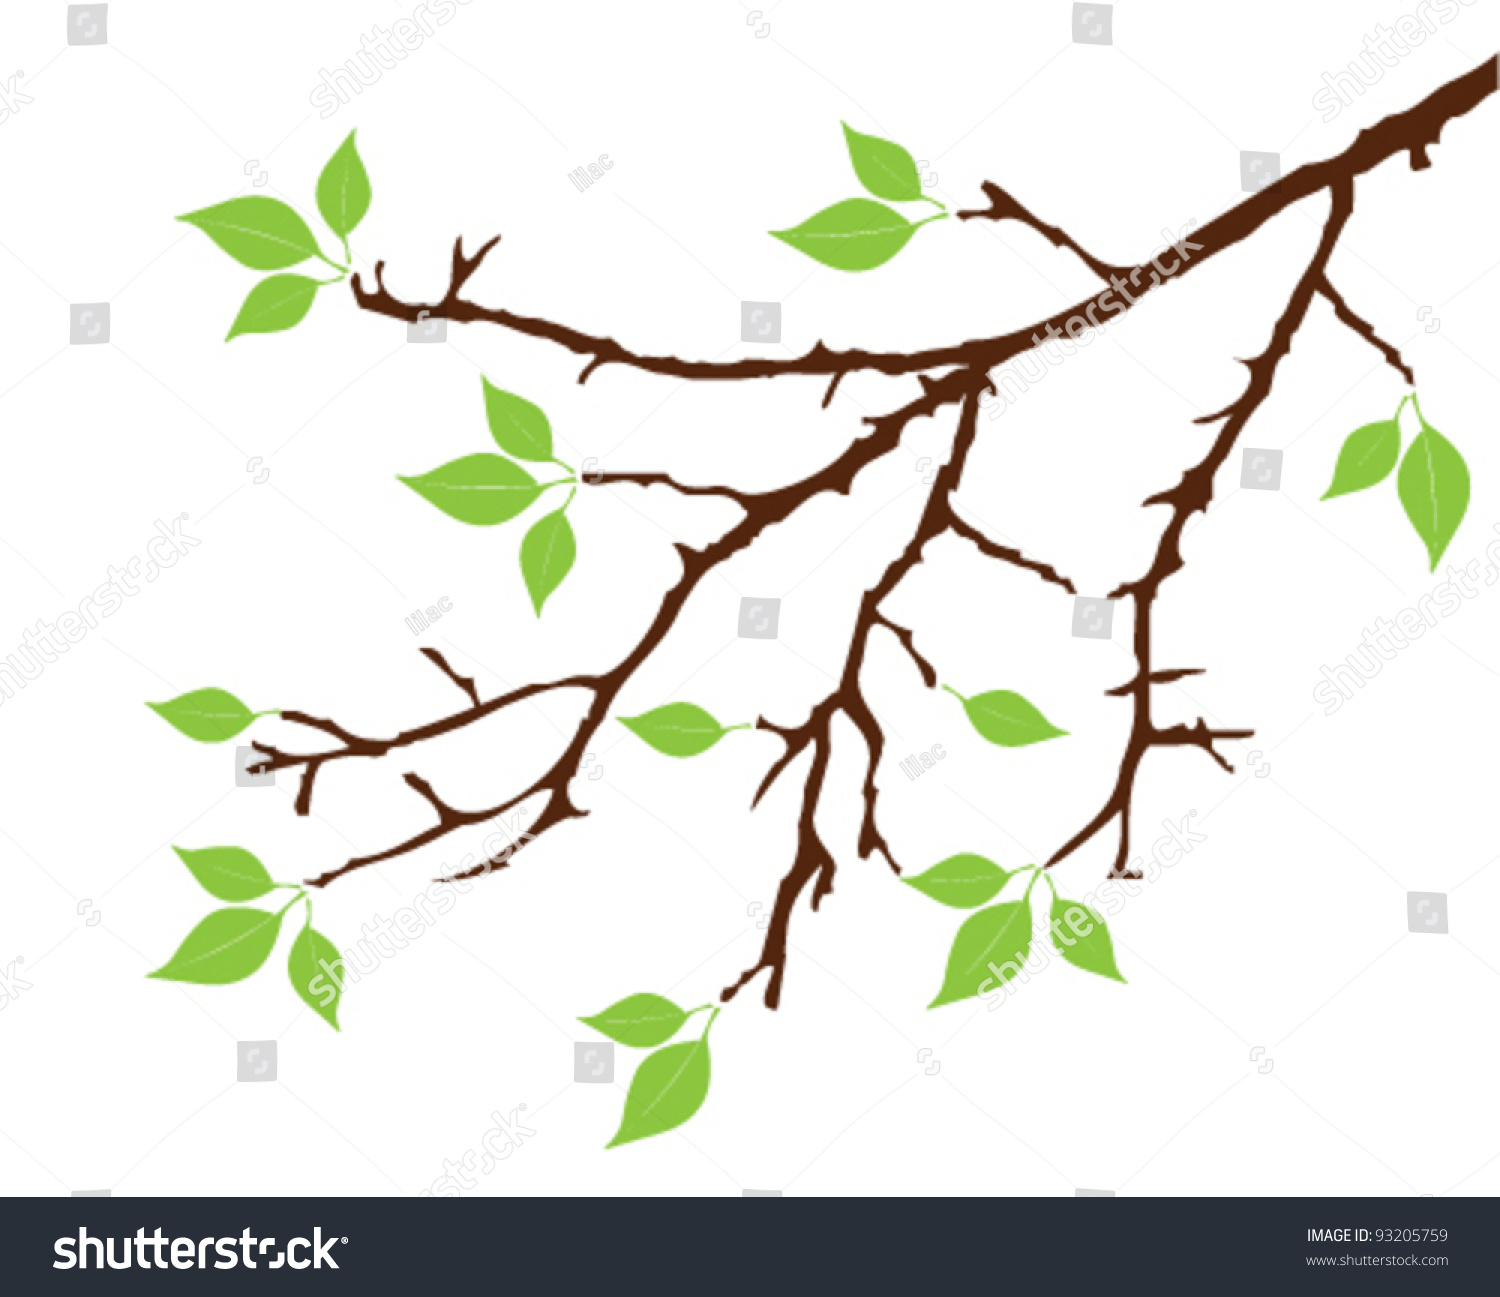 Vector Tree Branch With Green Leaves - 93205759 : Shutterstock